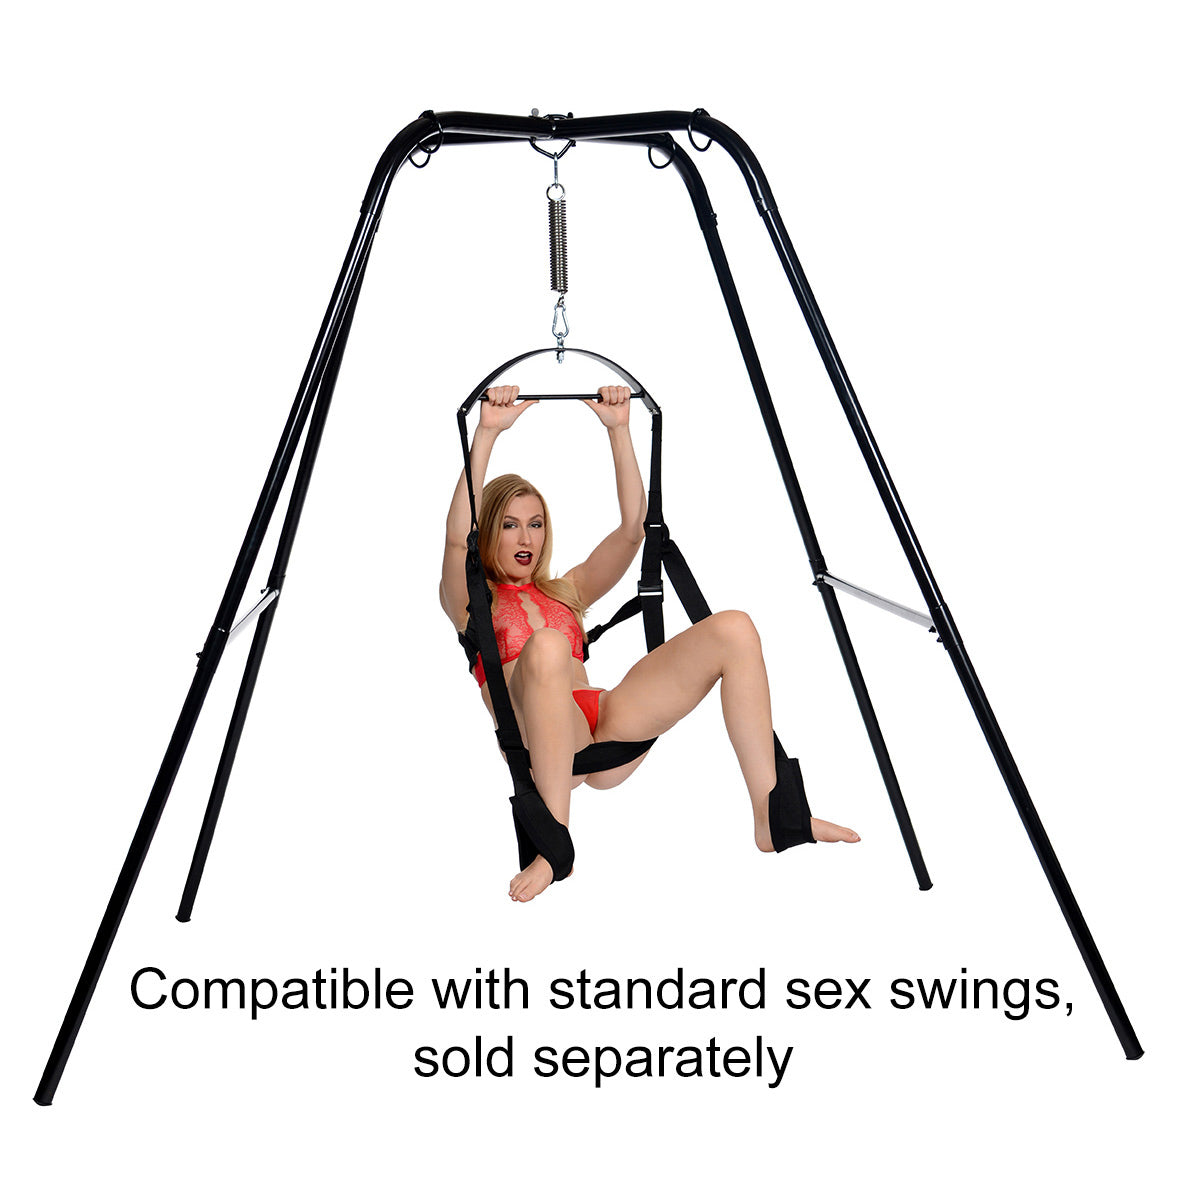 Extreme Sling and Swing Stand - UABDSM